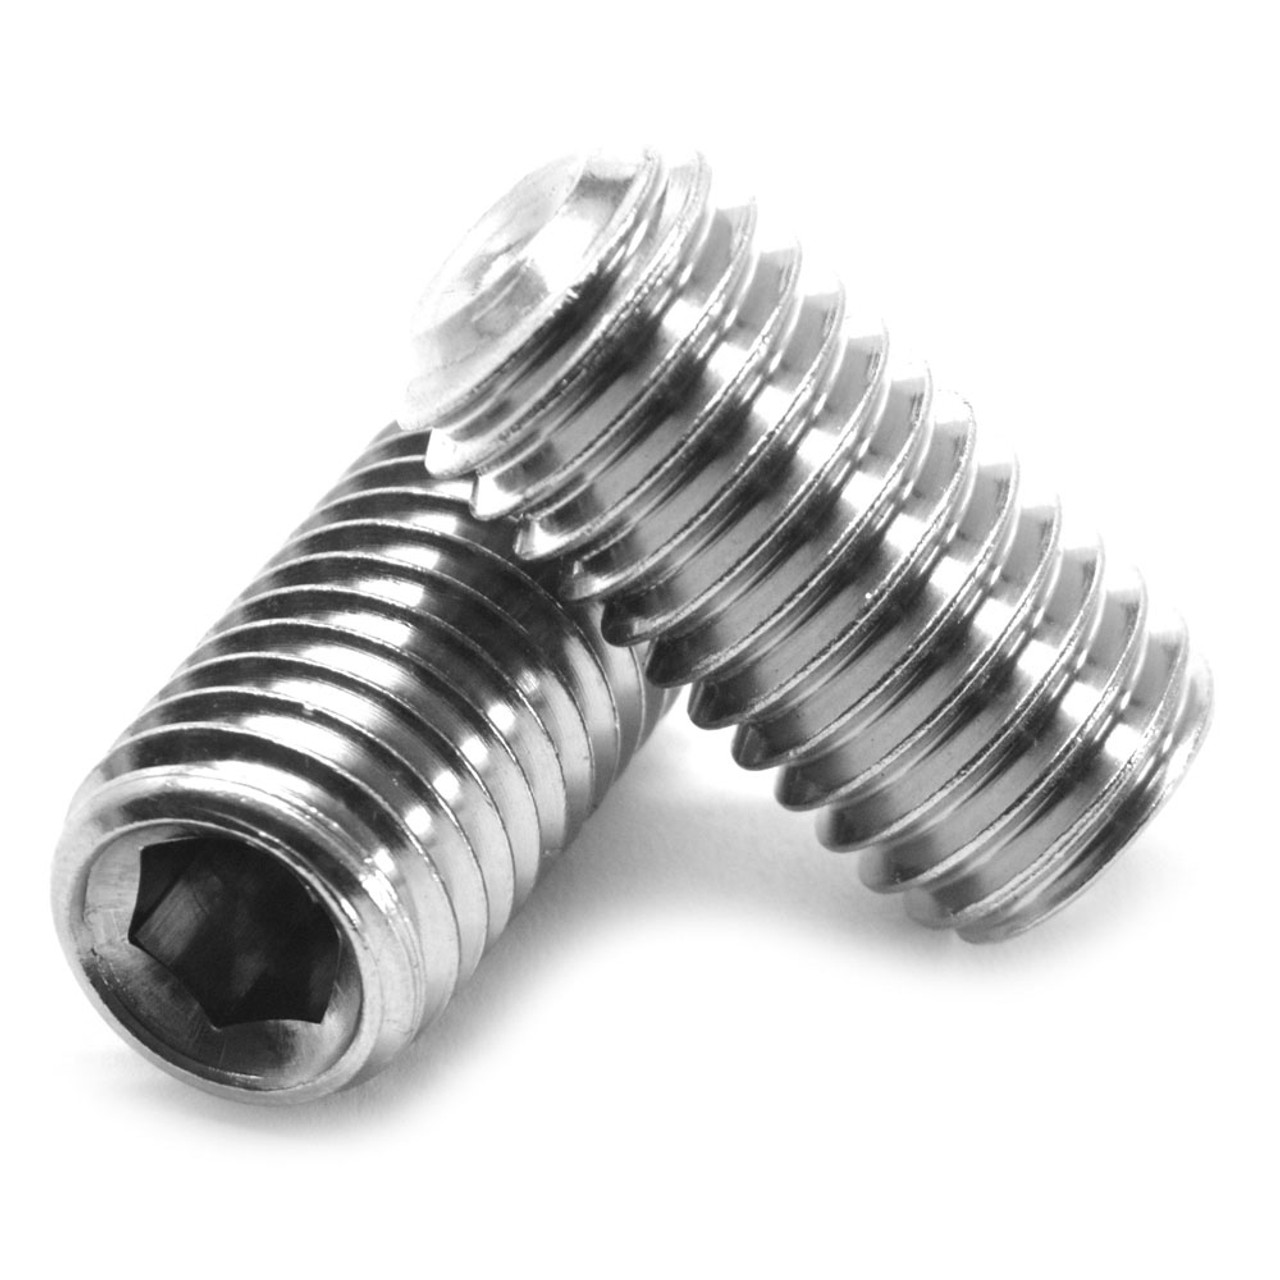 1"-8 x 2" Coarse Thread Socket Set Screw Cup Point Stainless Steel 18-8